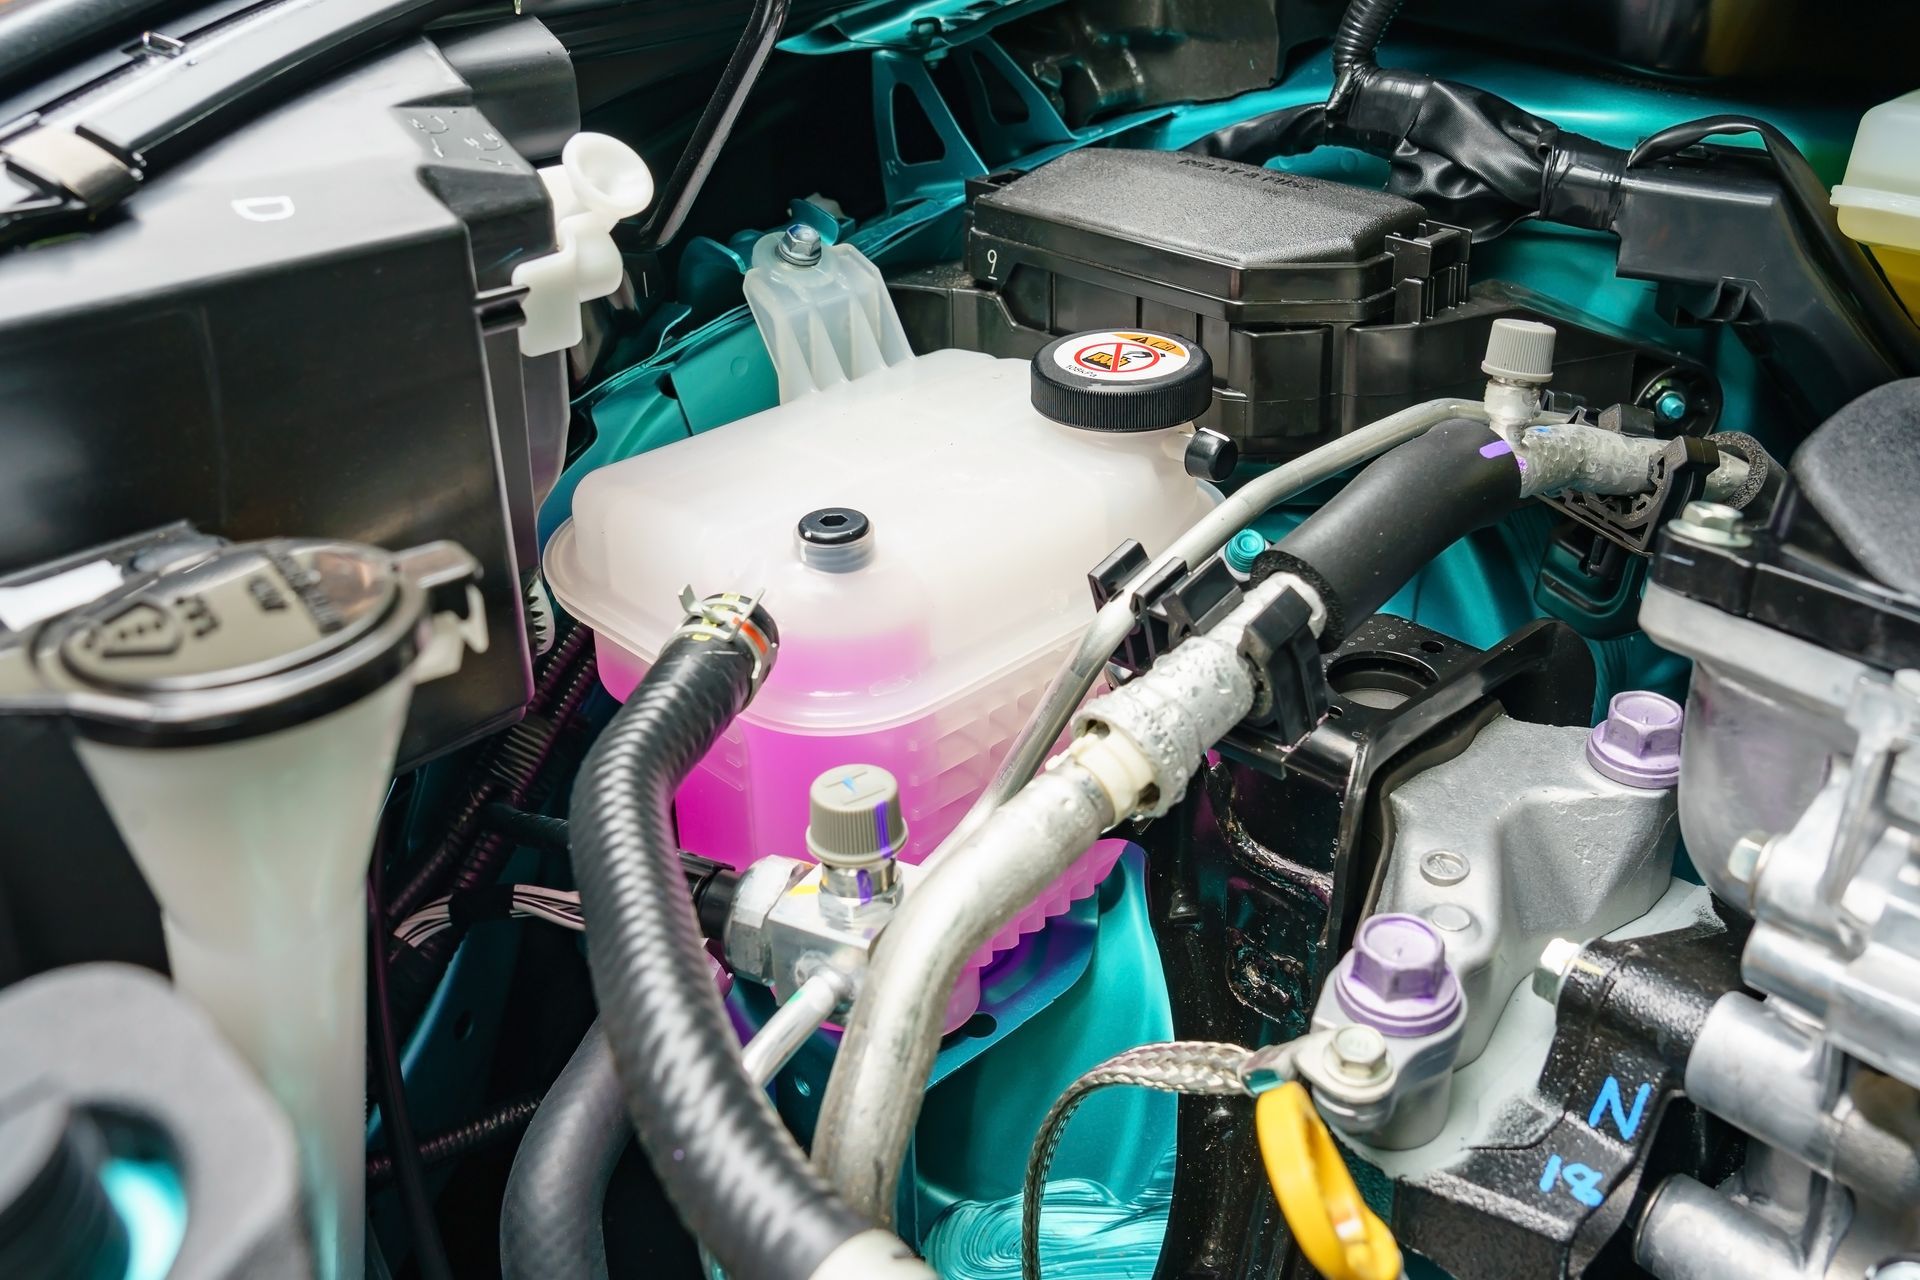 Cooling System Service at ﻿Terry's Automotive Group﻿ in ﻿Olympia, WA﻿